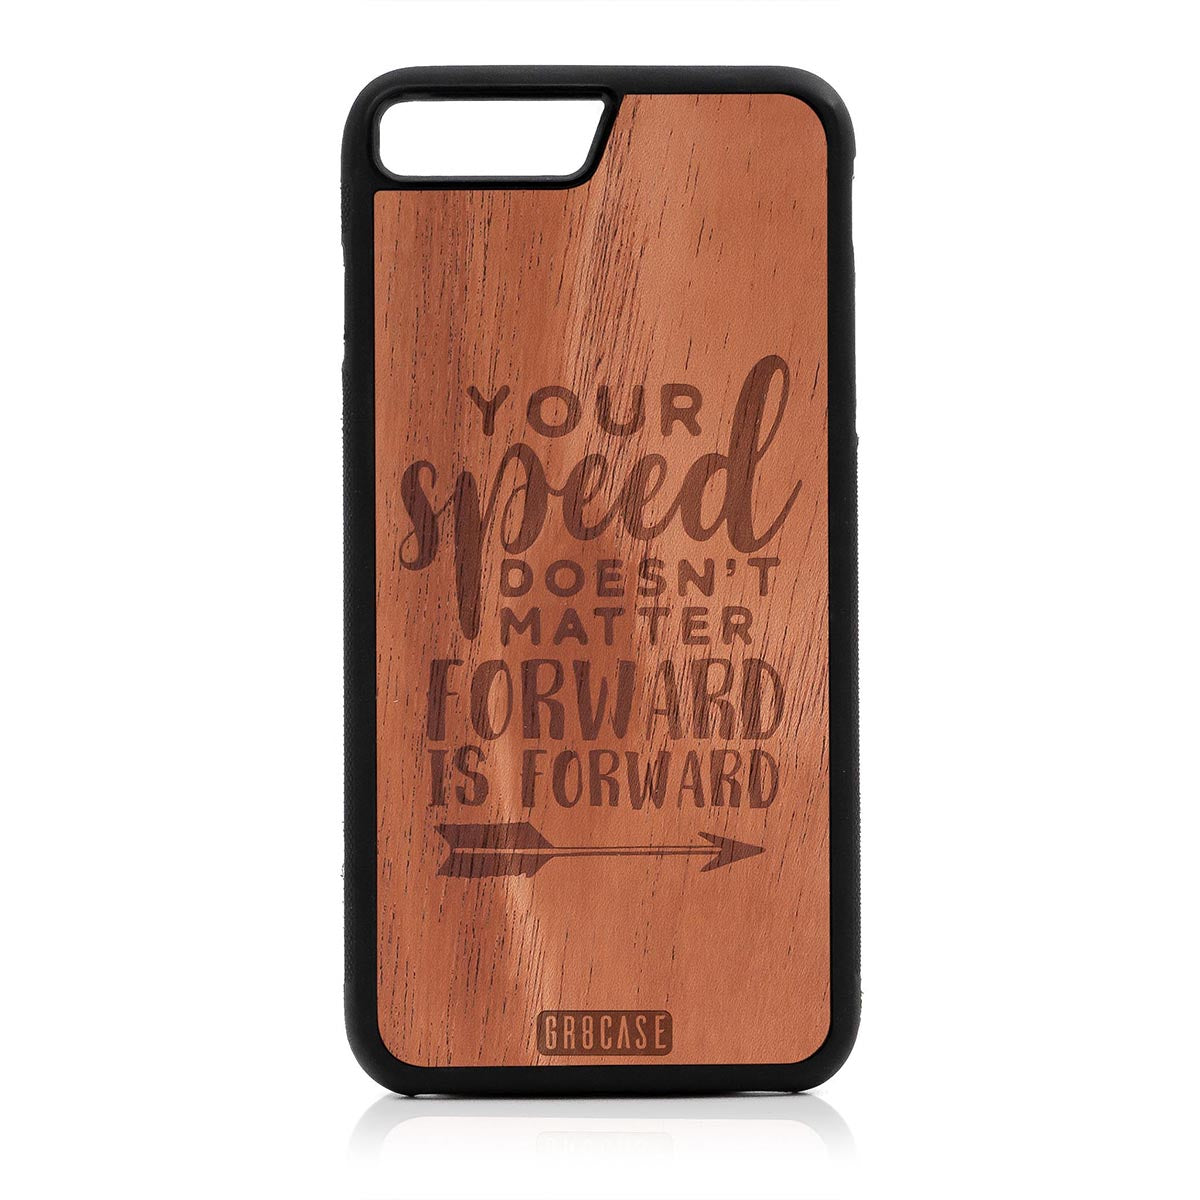 Your Speed Doesn't Matter Forward Is Forward Design Wood Case For iPhone 7 Plus / 8 Plus